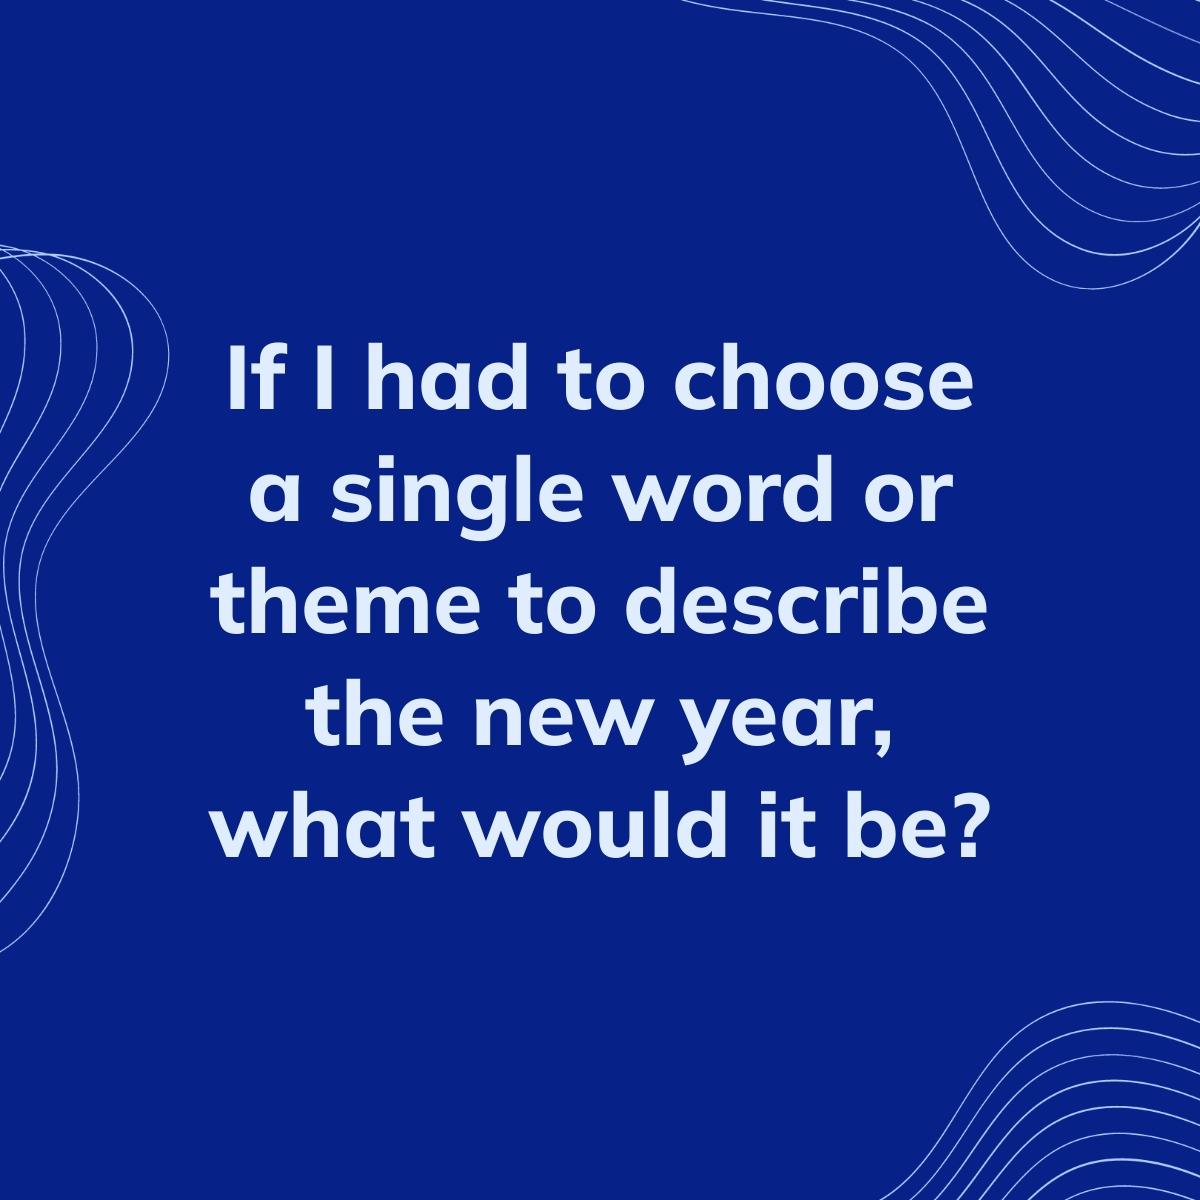 Journal Prompt: If I had to choose a single word or theme to describe the new year, what would it be?